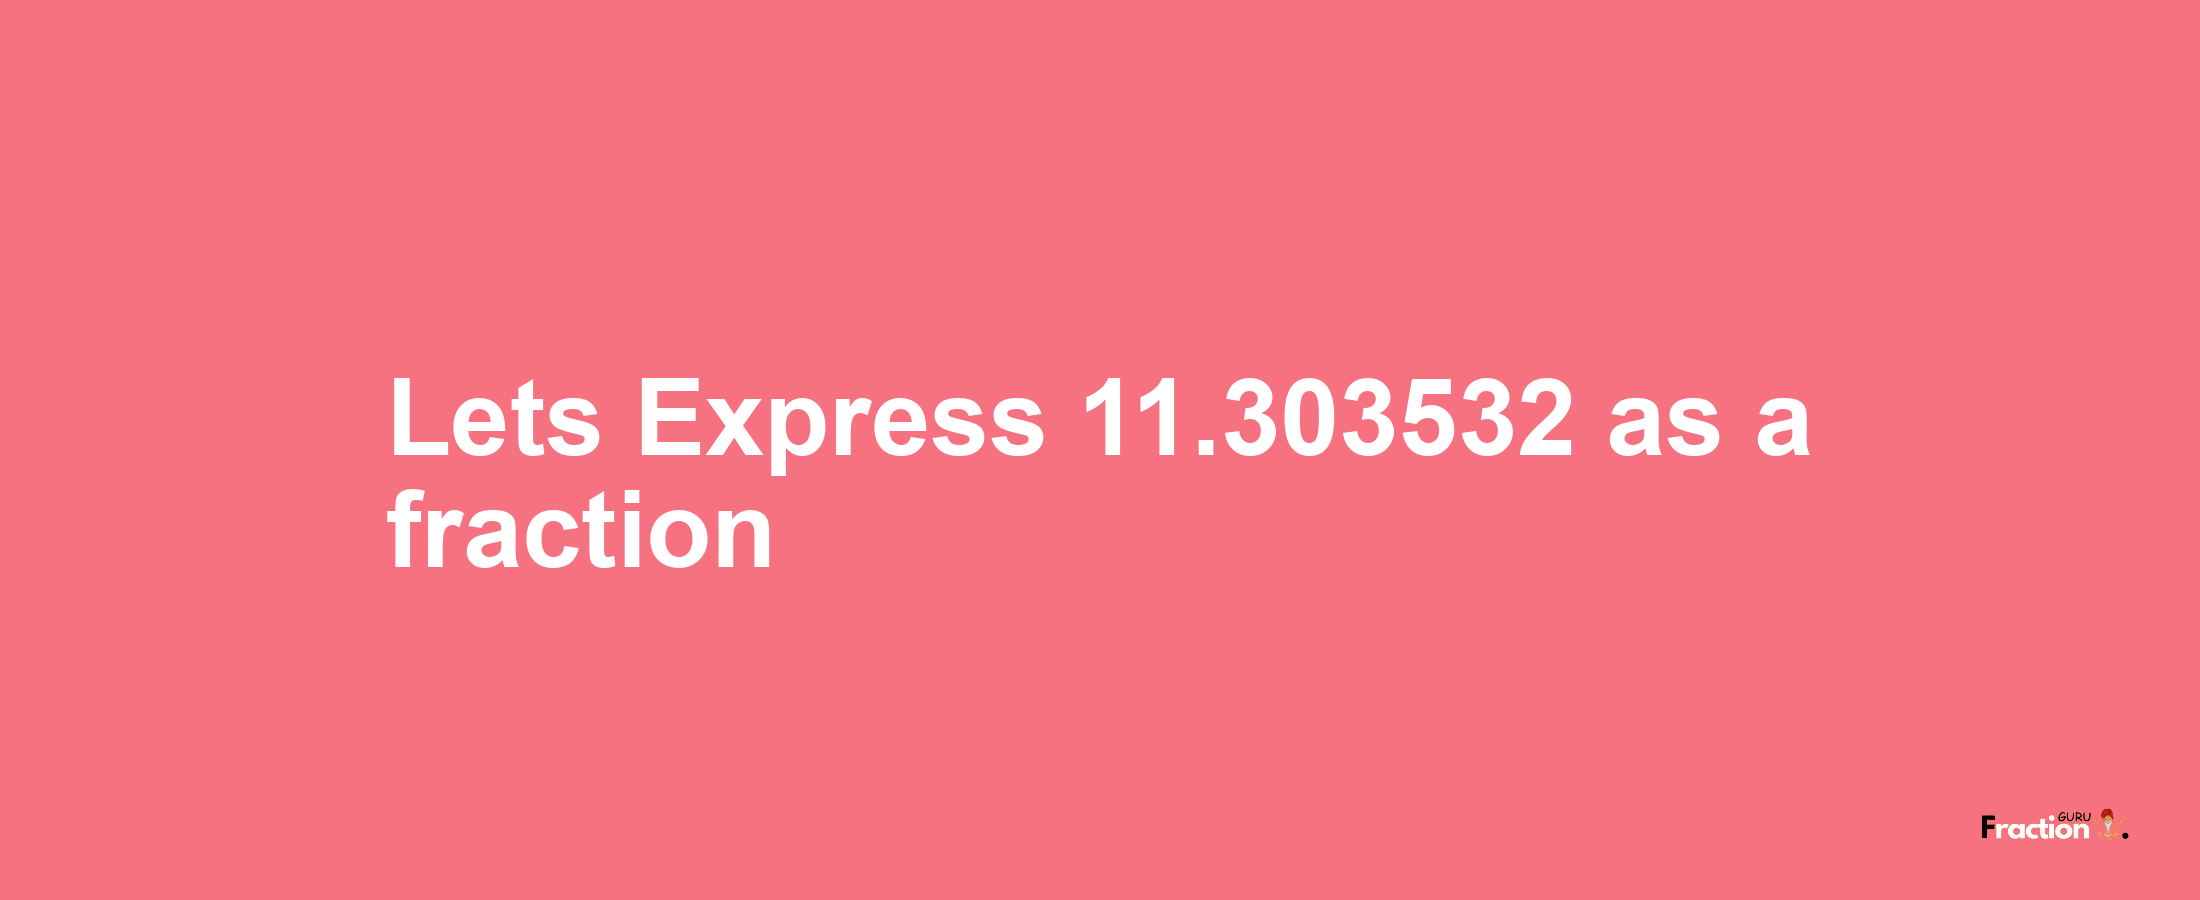 Lets Express 11.303532 as afraction